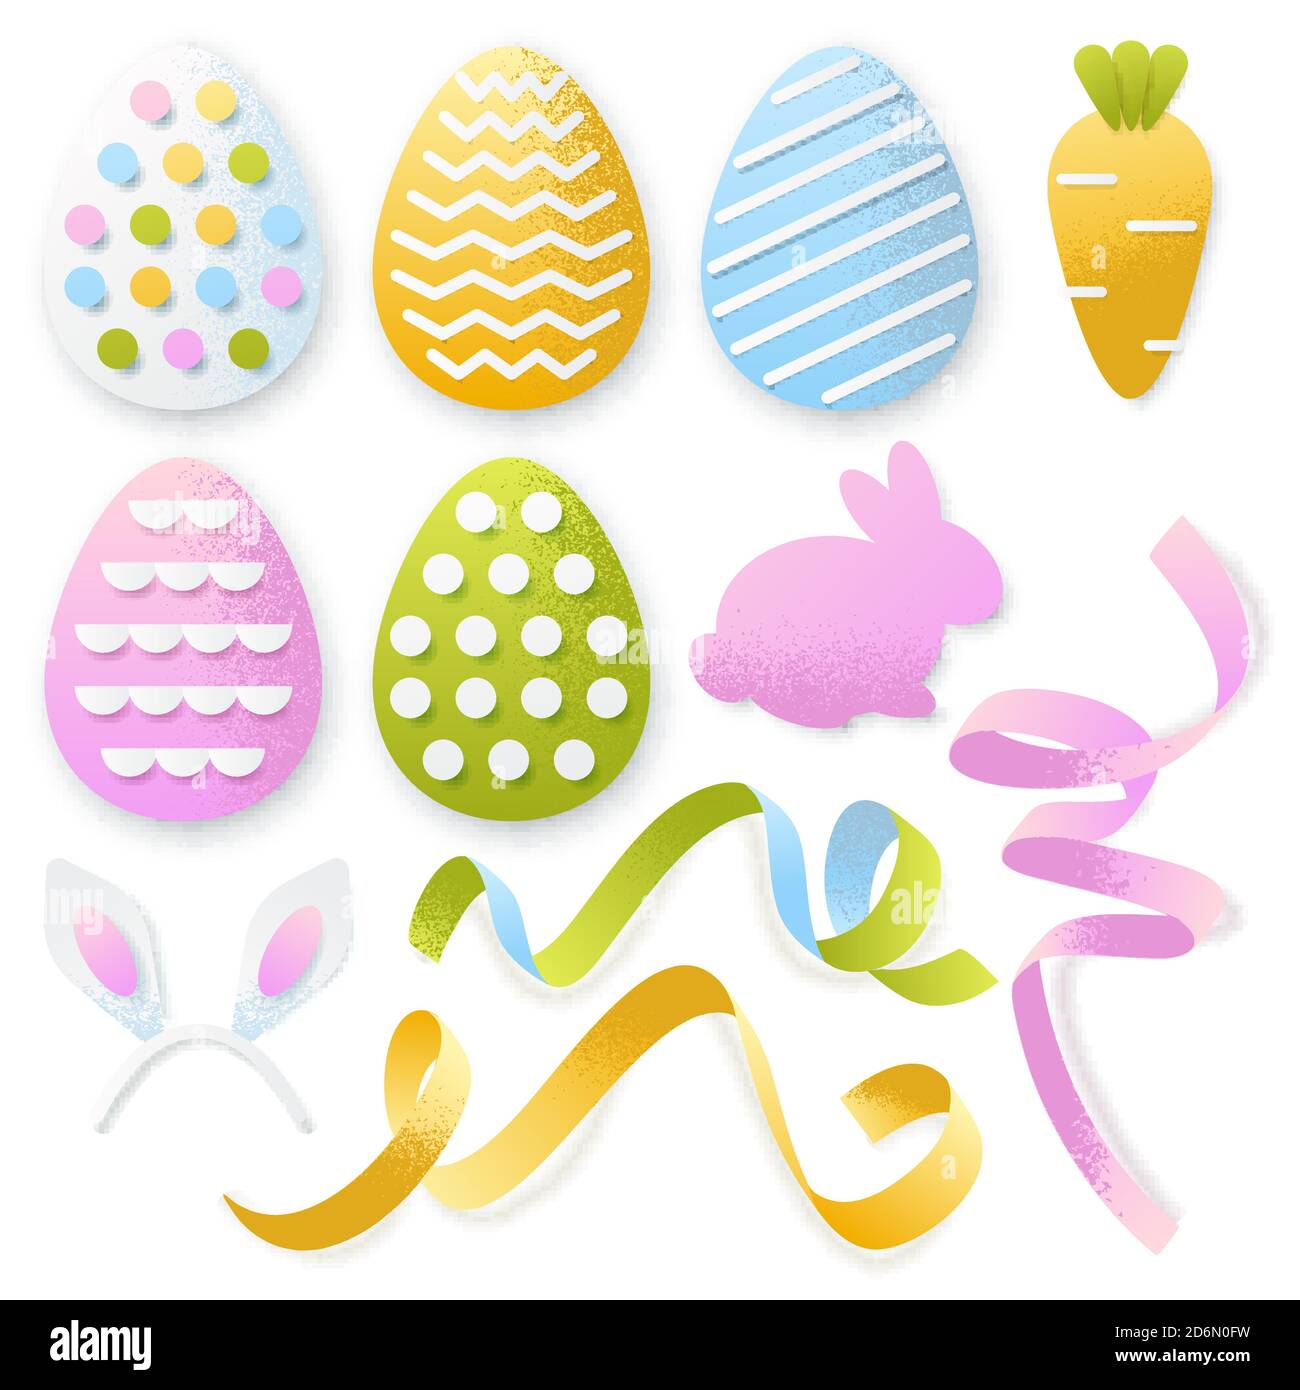 Easter 3d paper cut eggs, ribbons, rabbit set. Vector holiday craft handmade design elements on white background. Stock Vector